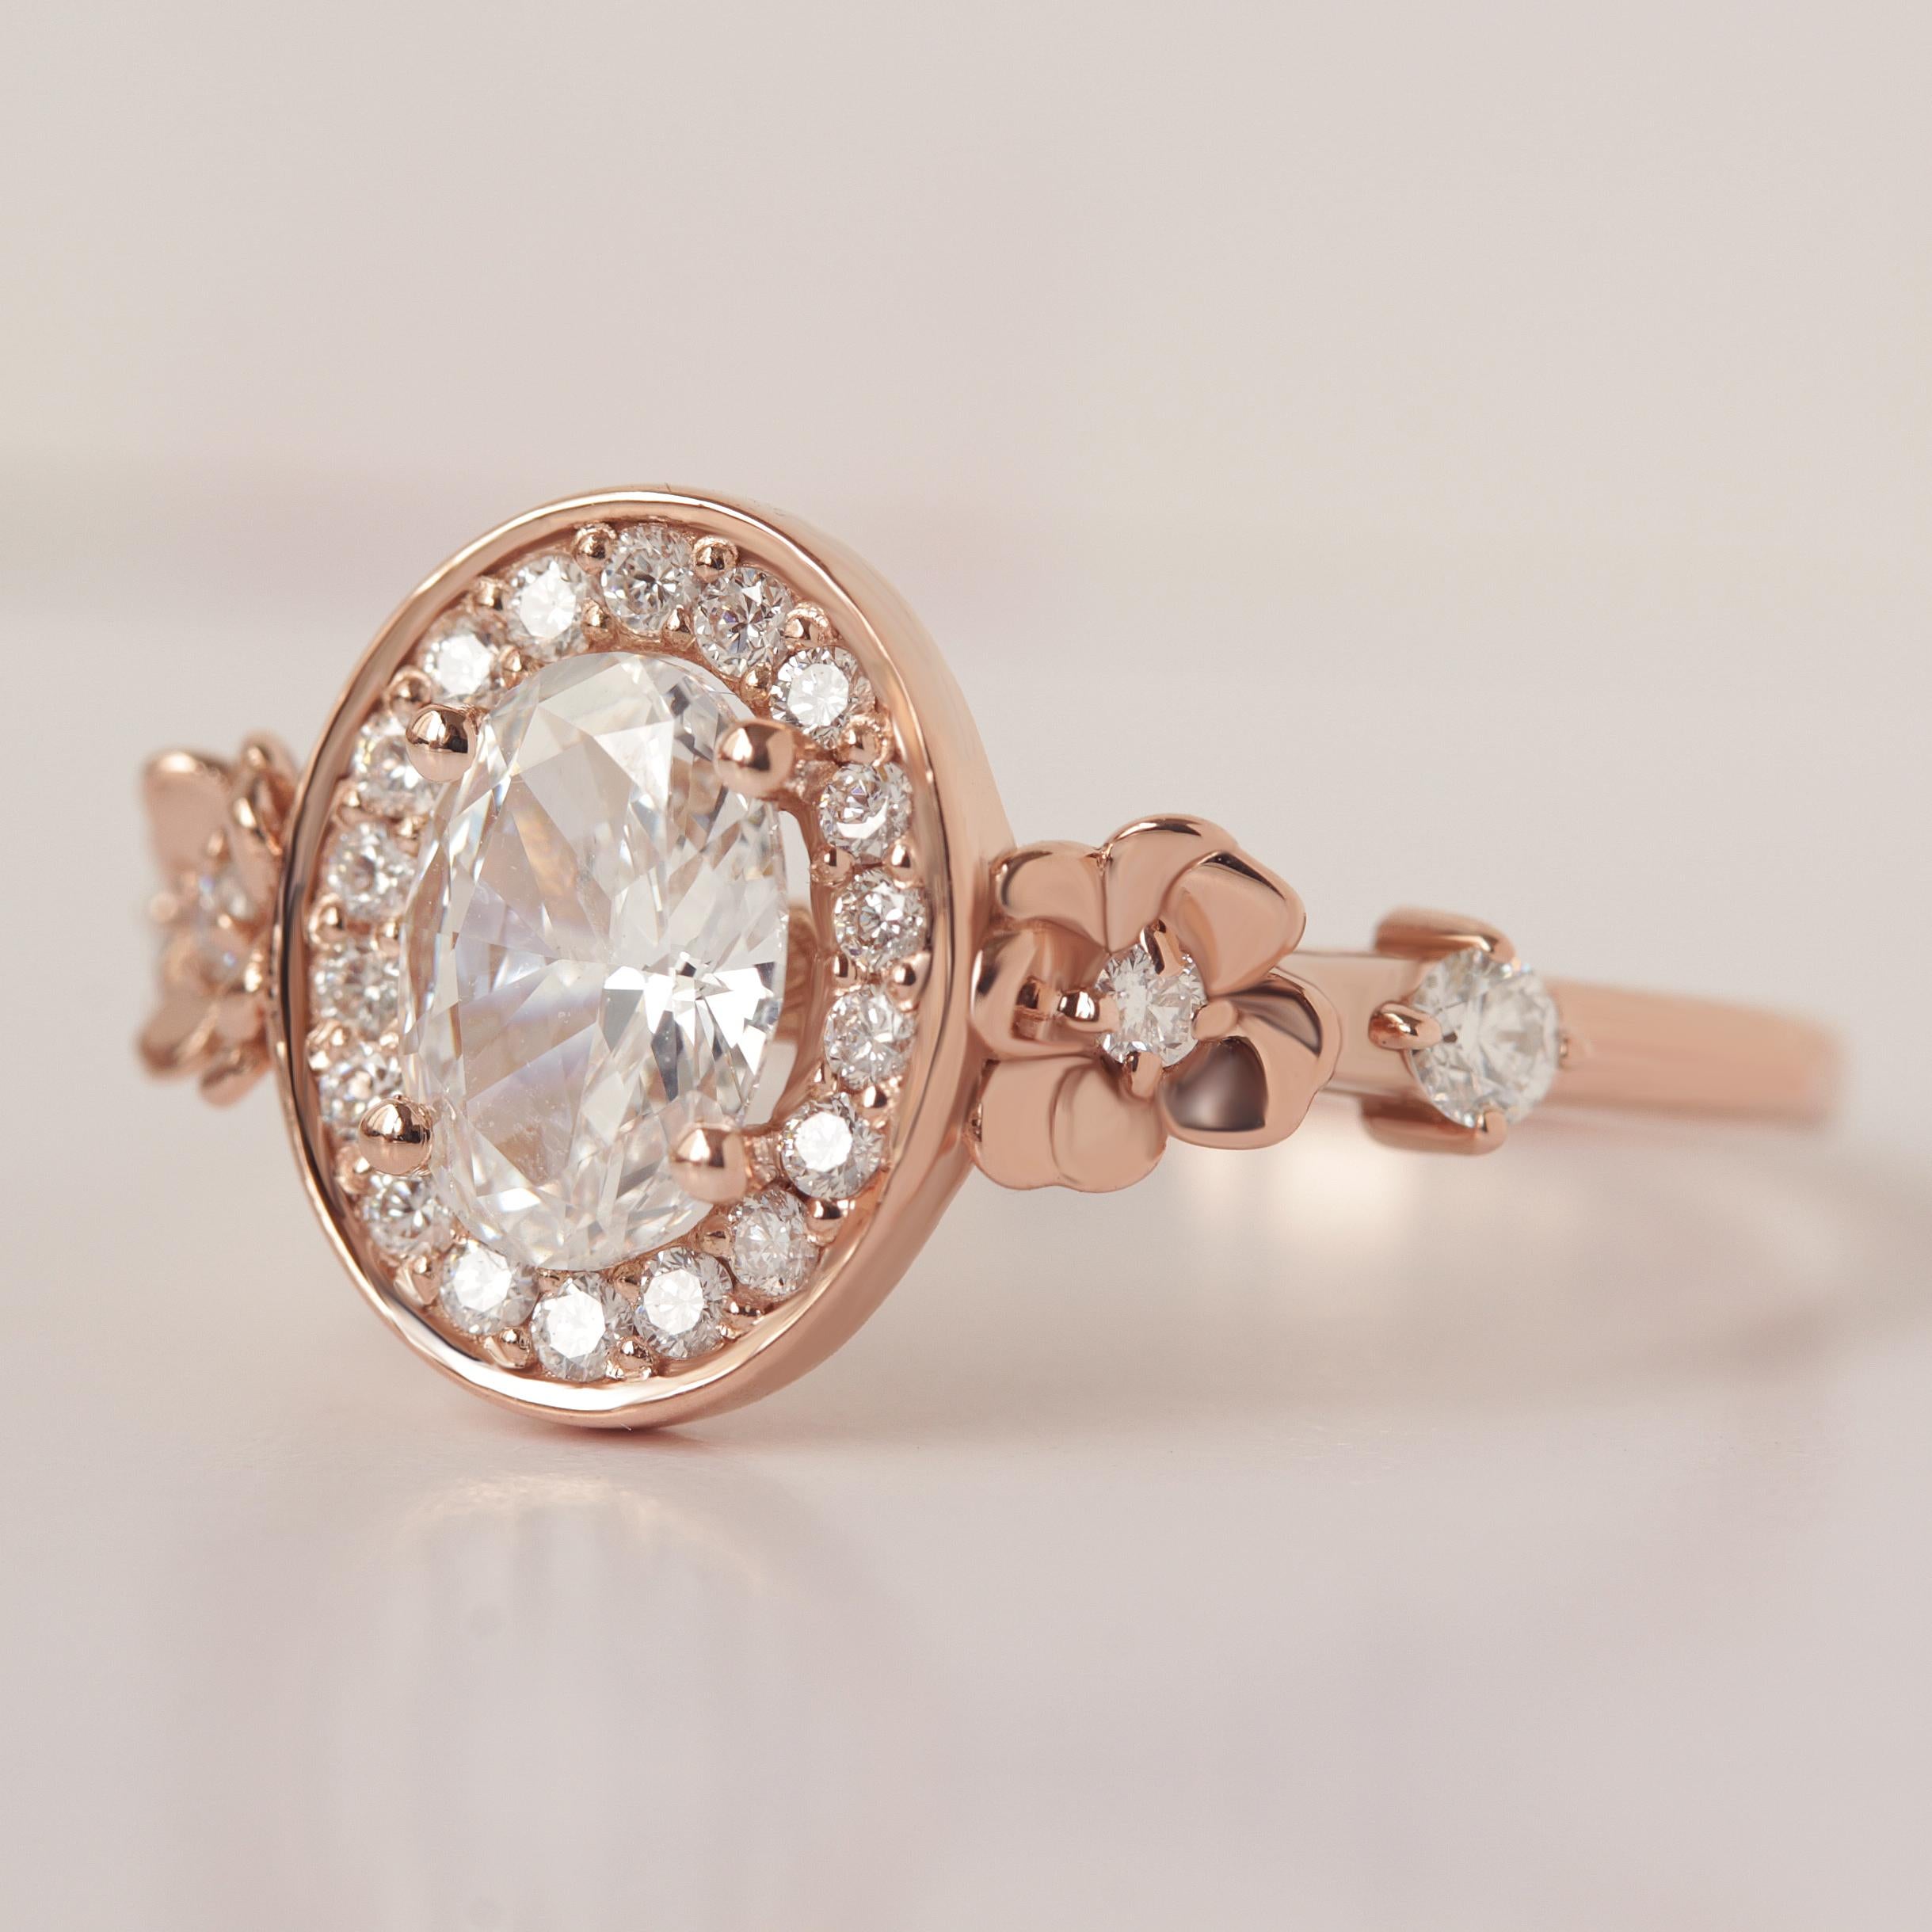 Oval Cut Oval Halo Diamond Floral Engagement Ring - 